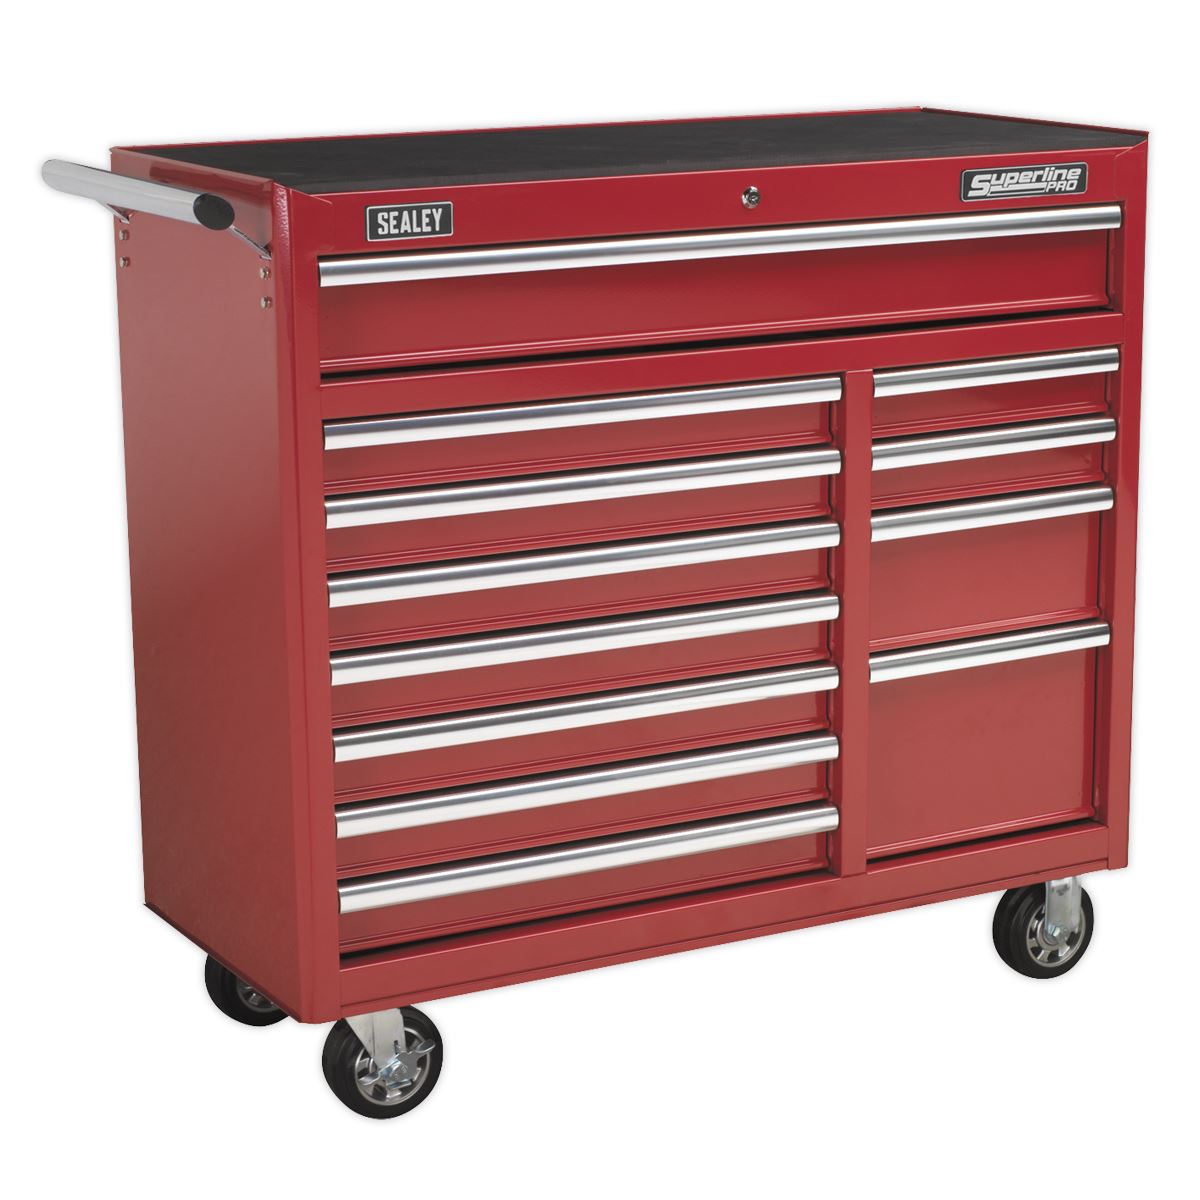 Sealey Superline Pro Rollcab 12 Drawer with Ball-Bearing Slides Heavy-Duty - Red